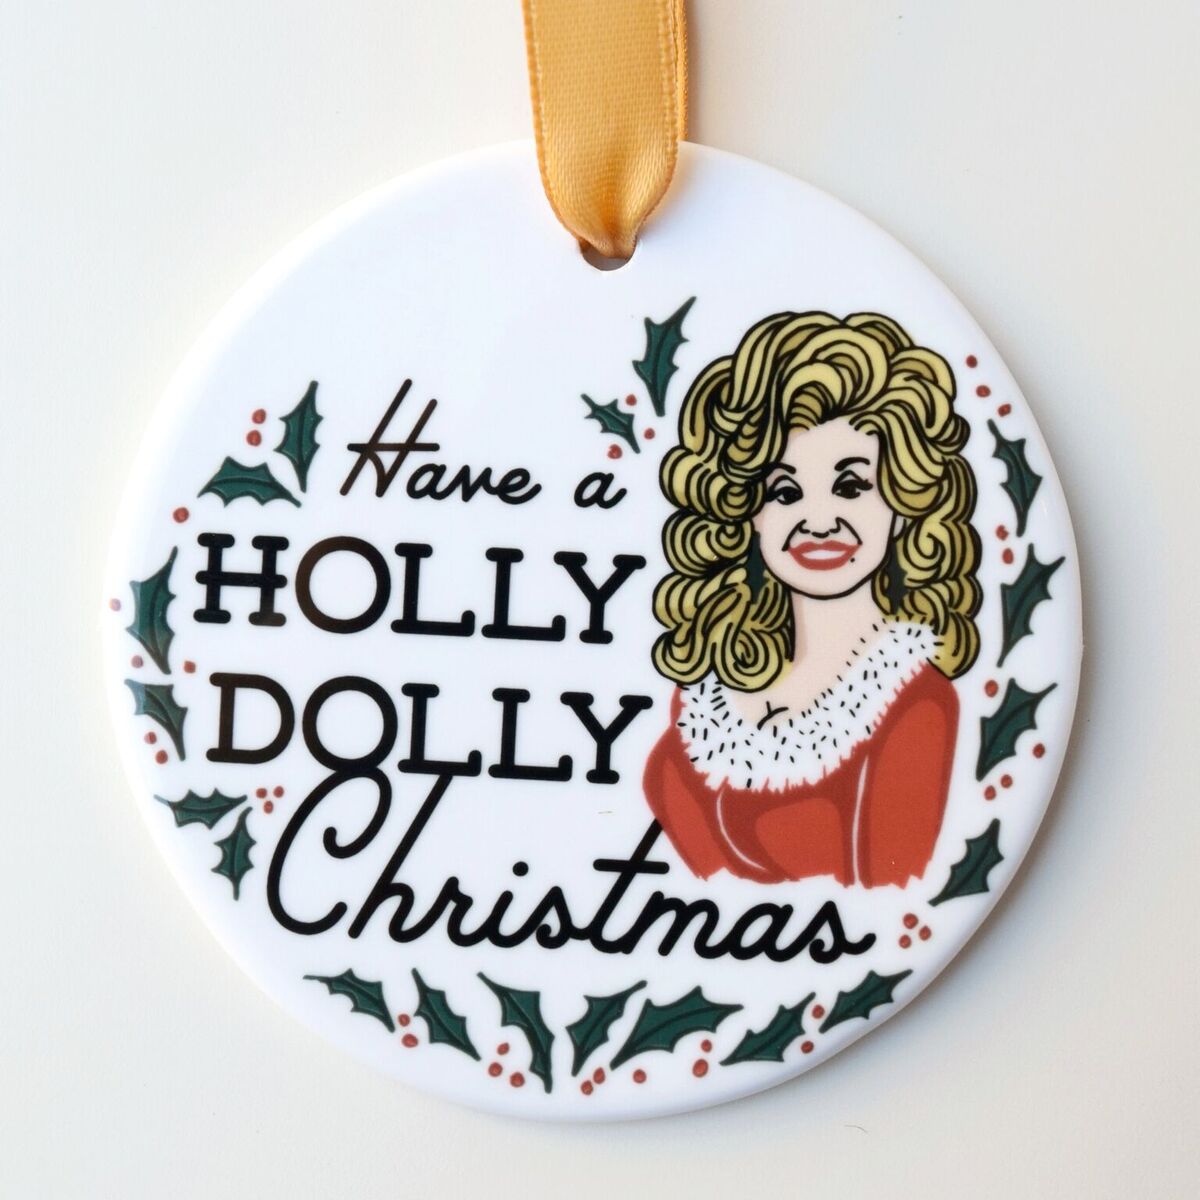 Have A Holly Dolly Christmas Dolly Parton Ornament